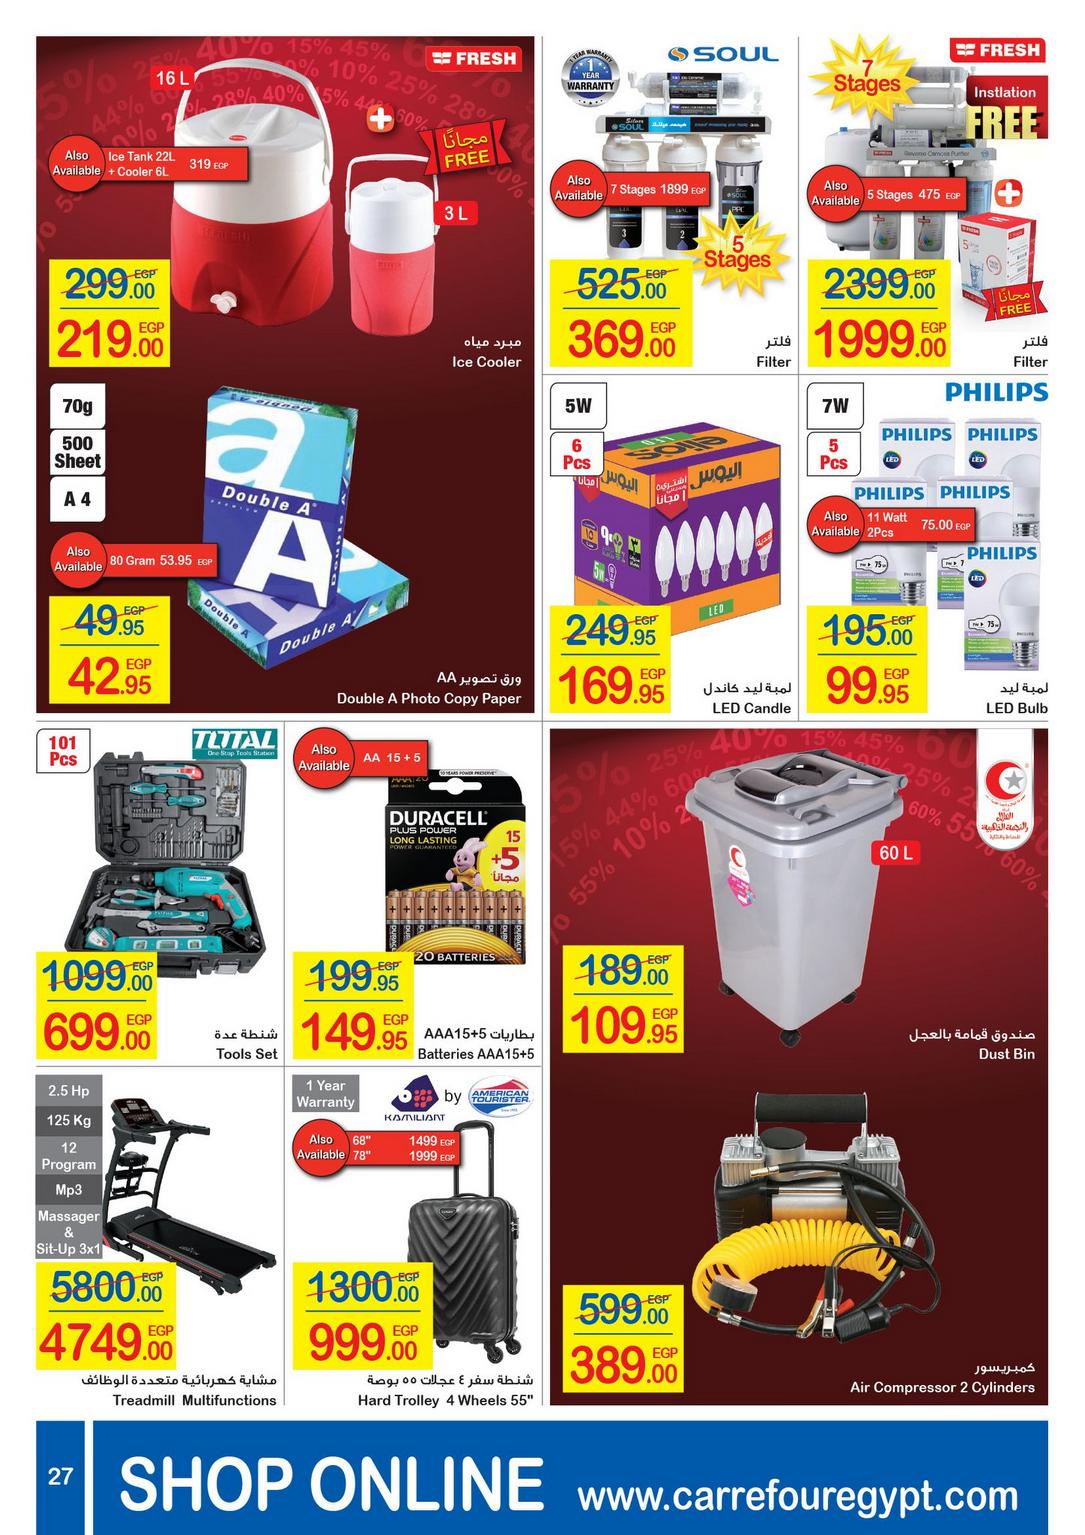 Carrefour Deals from 1/1 till 14/1 | Carrefour Egypt 28